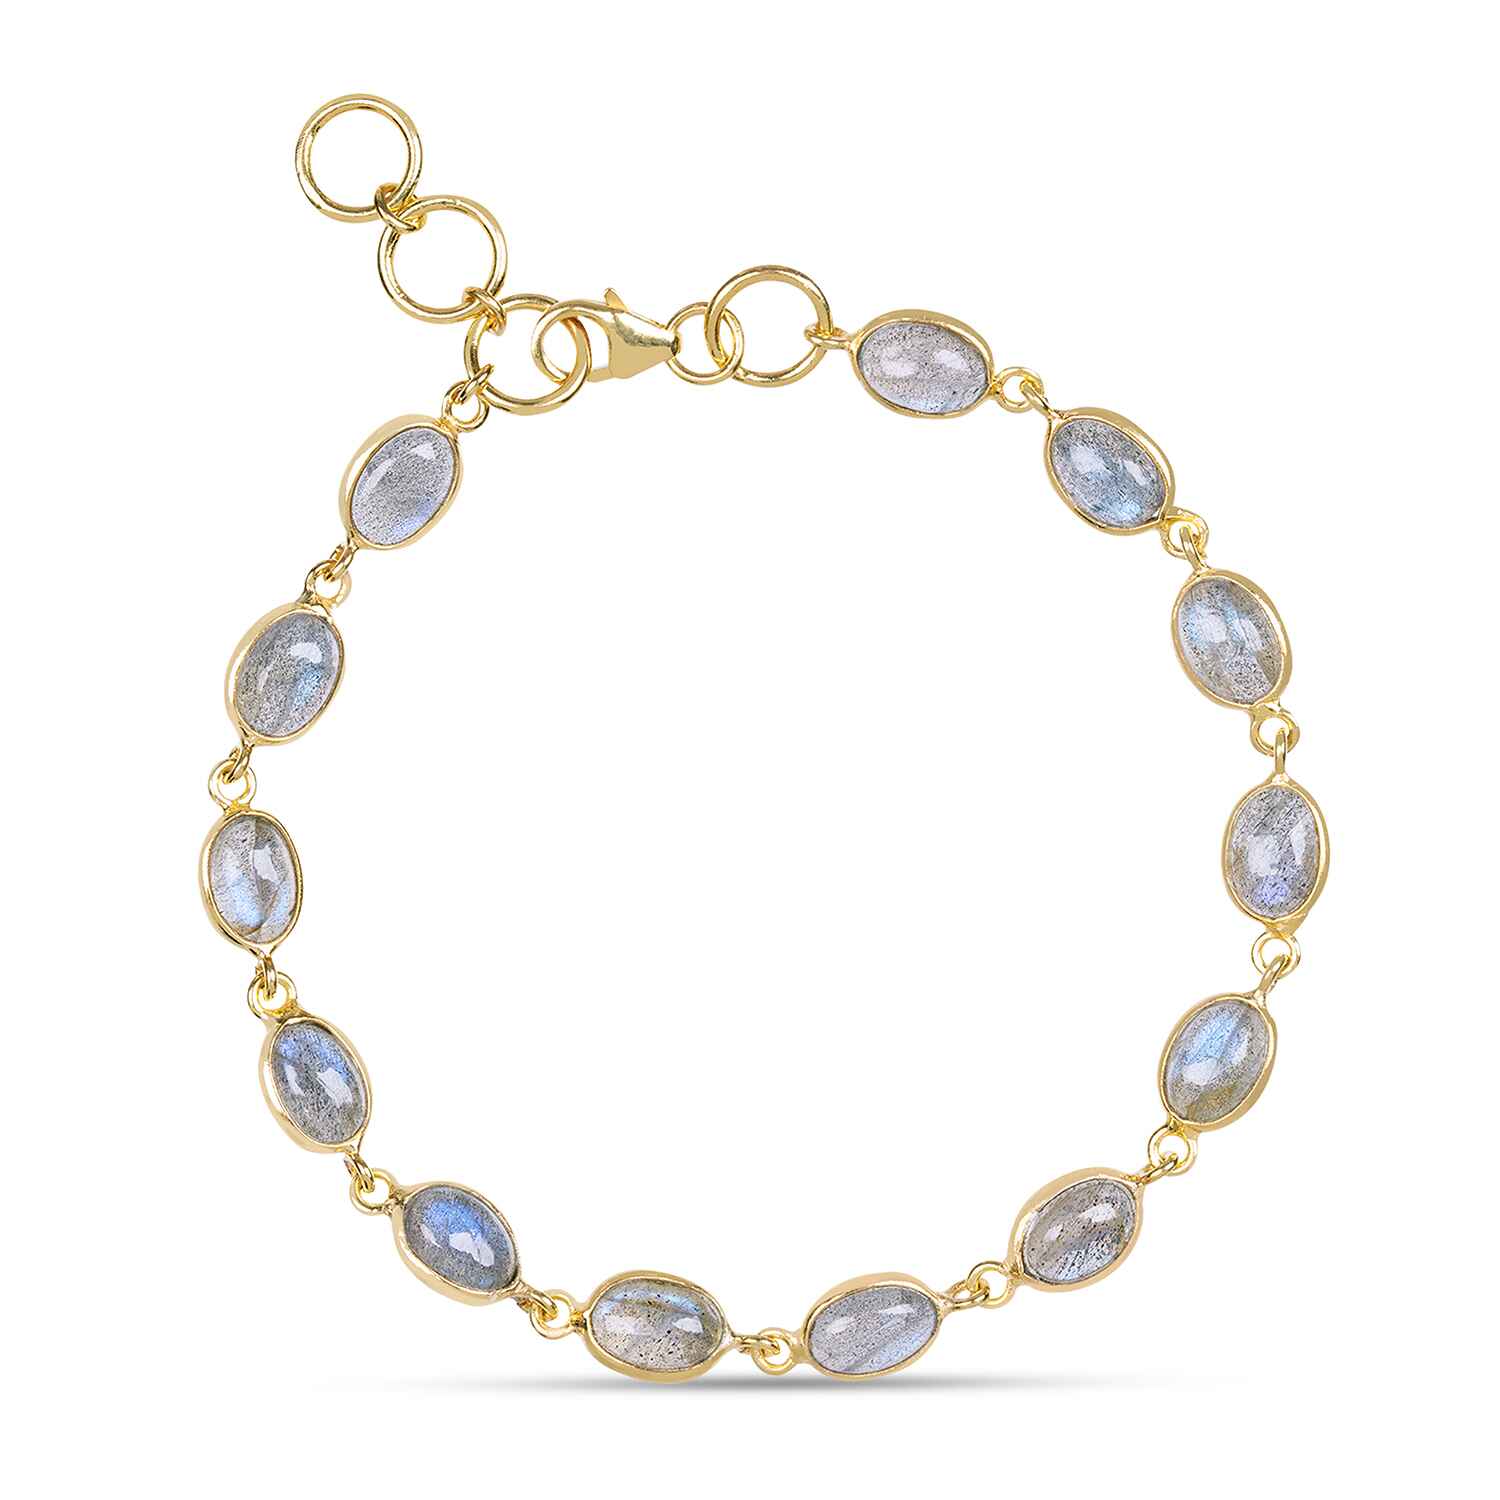 With it's beautiful shades of green, blue and gold the Luna Labradorite Gold Chain Bracelet is one of our best selling sustainable bracelets.